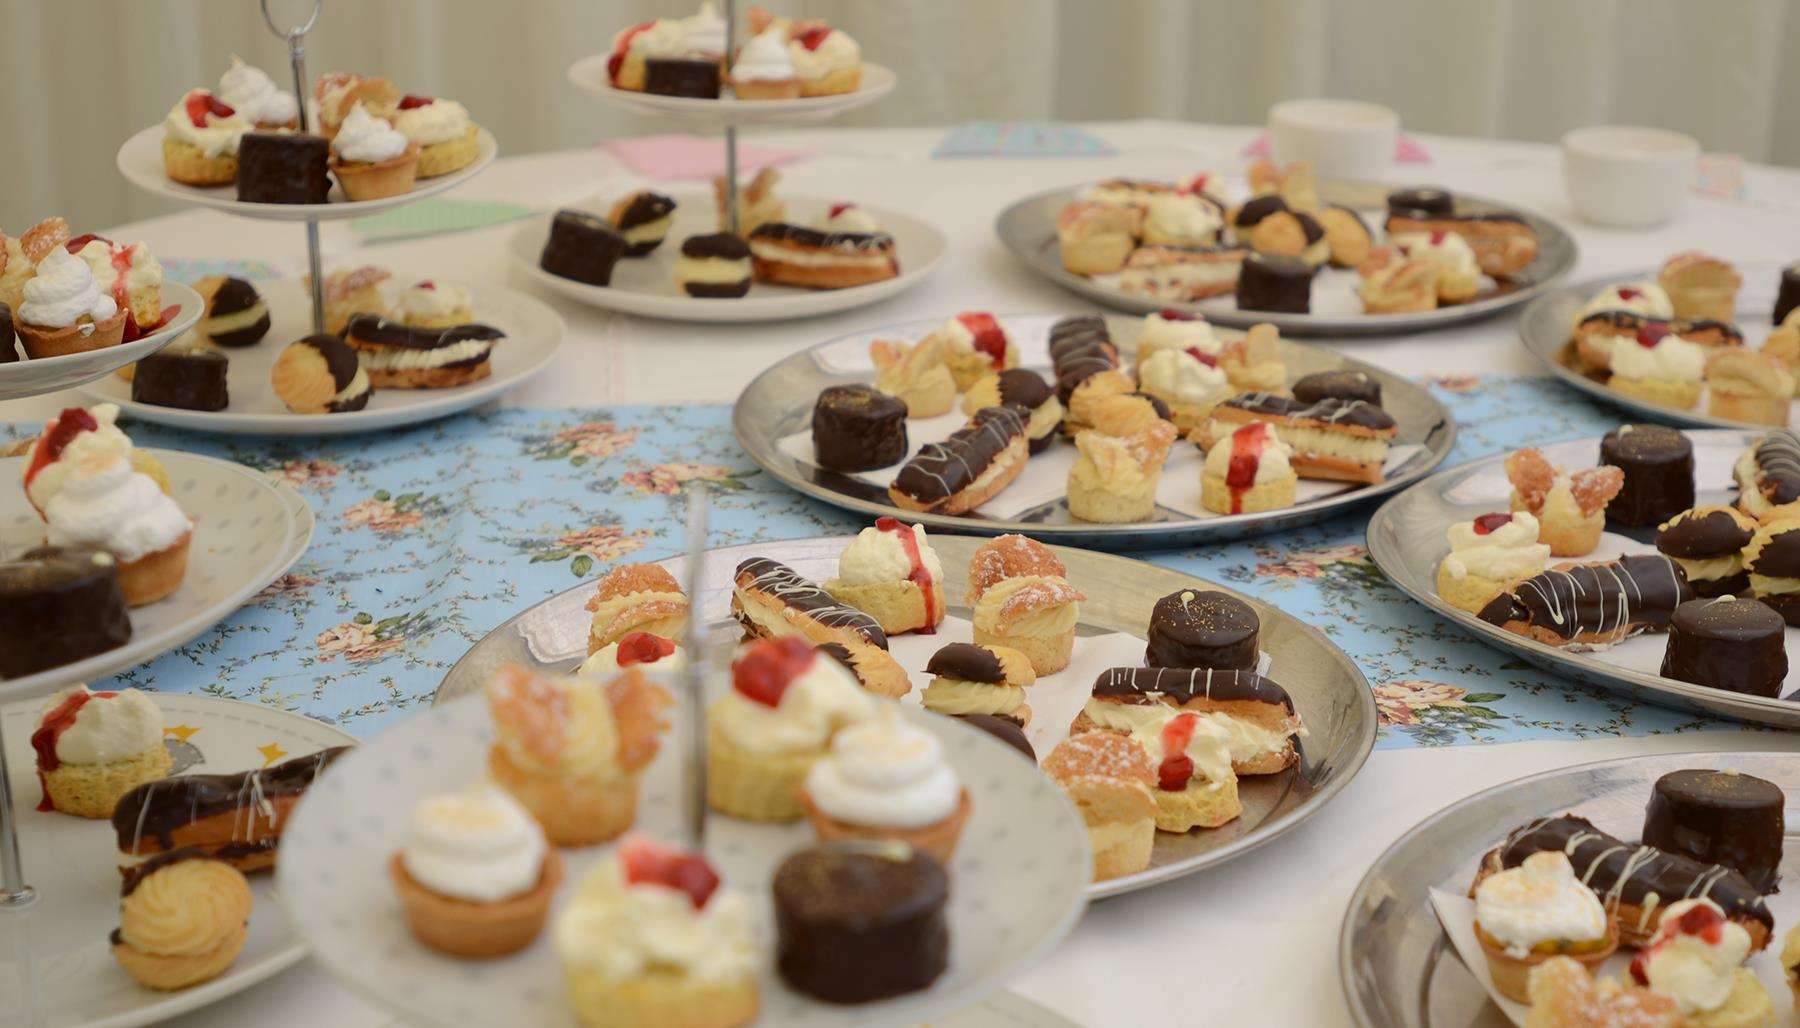 Enjoy a vintage cake or two this weekend